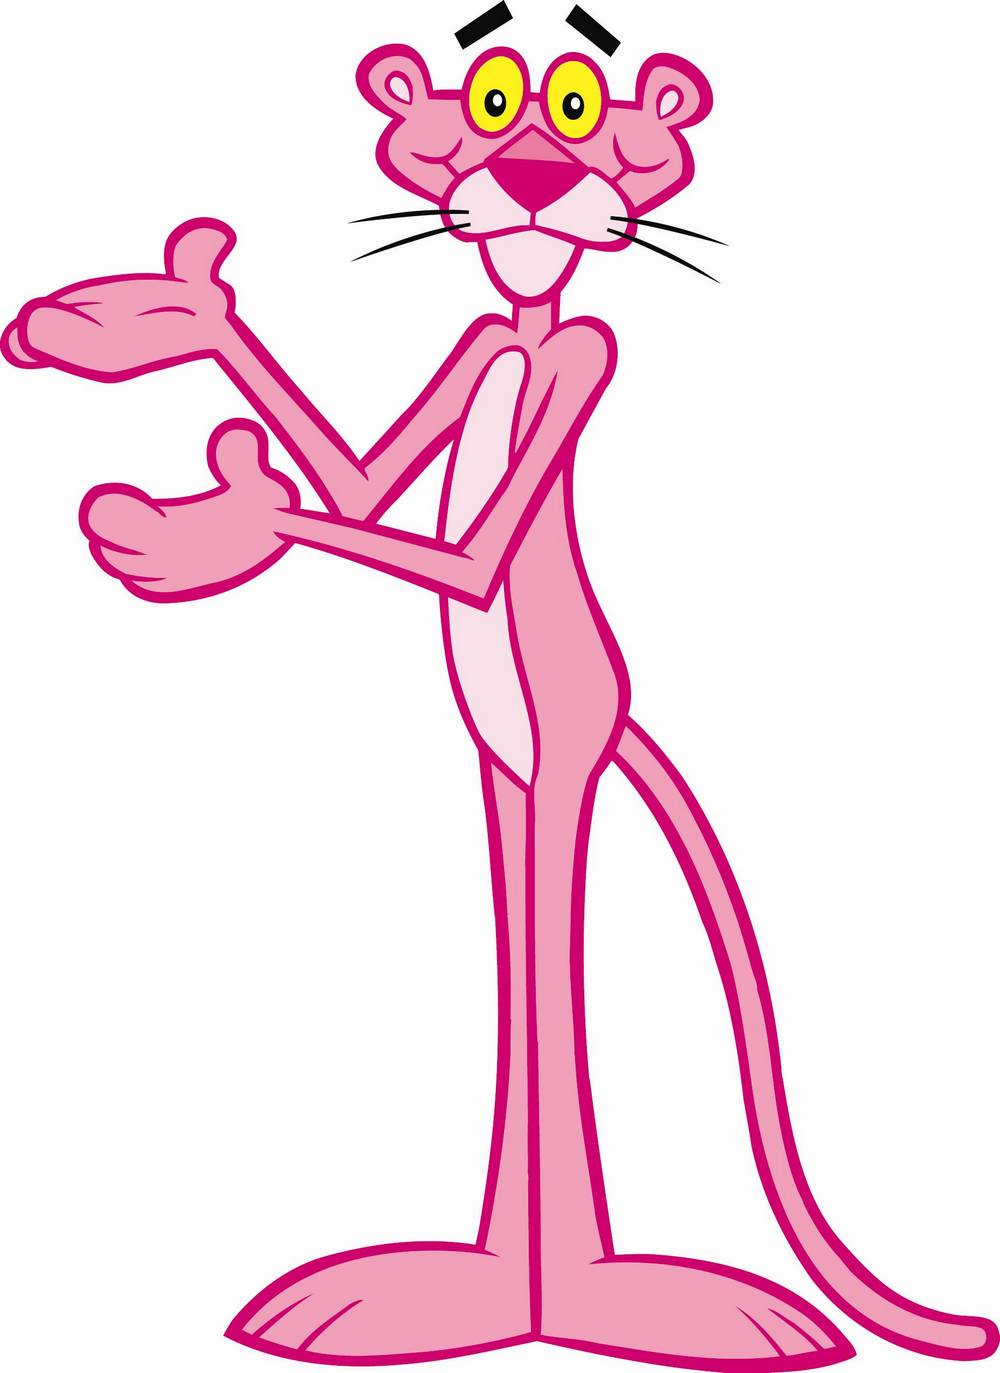 The Pink Panther Wallpapers - Wallpaper Cave